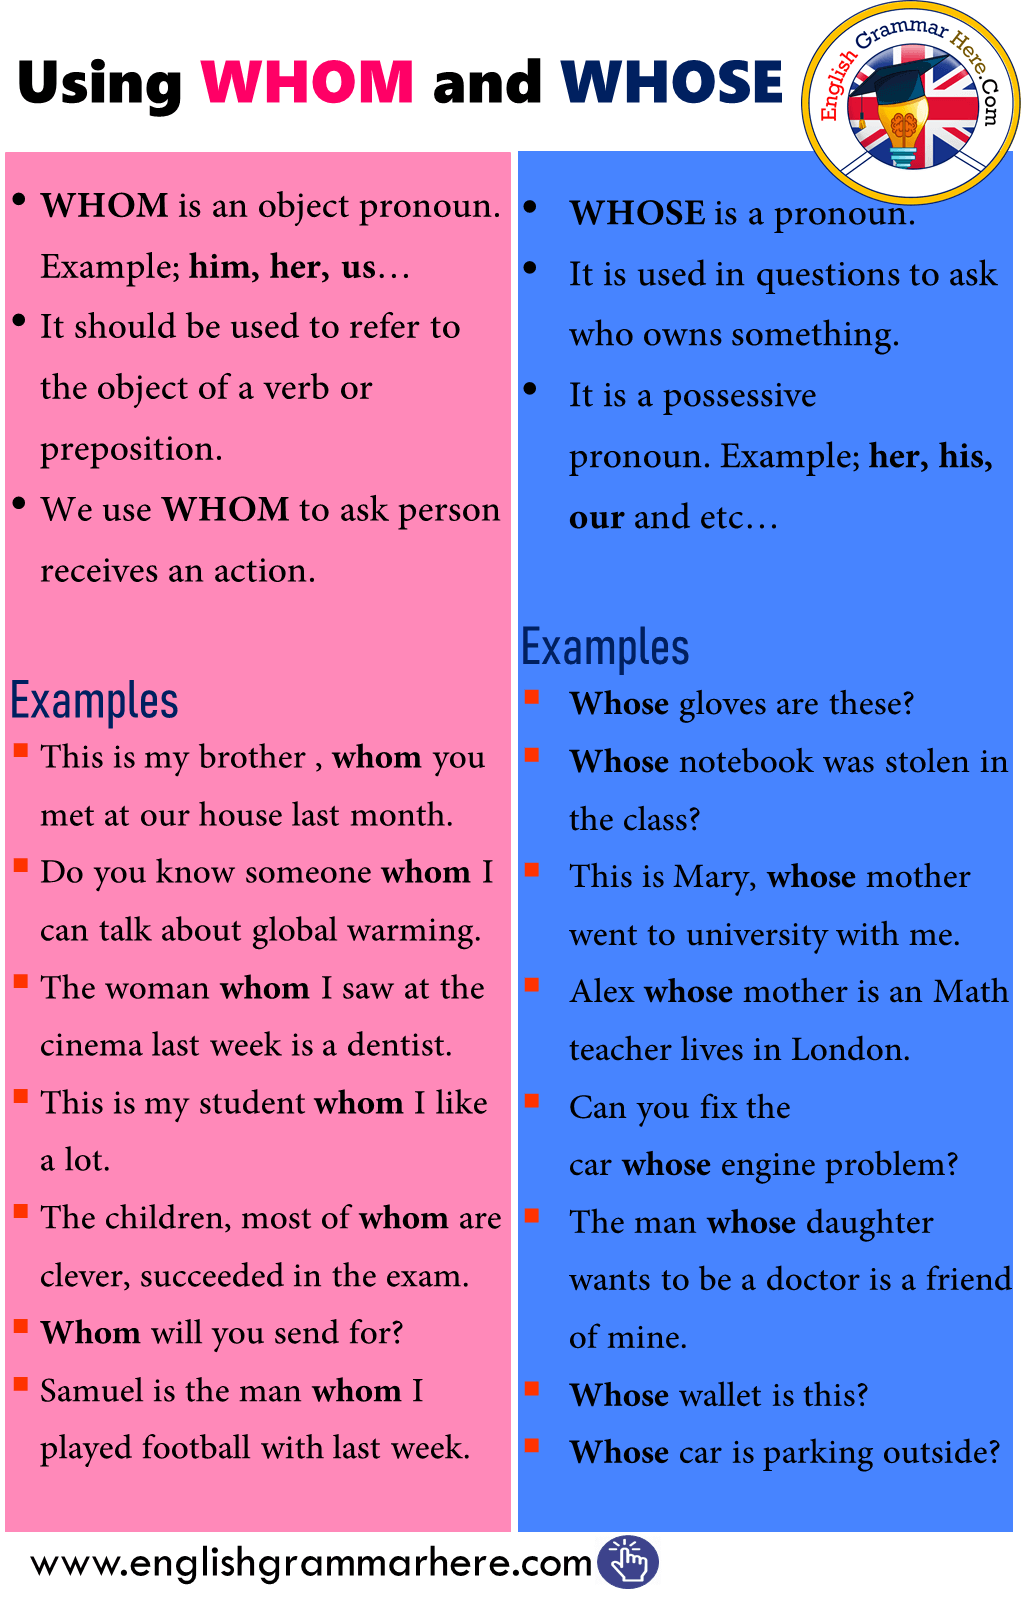 Using WHOM and WHOSE in English